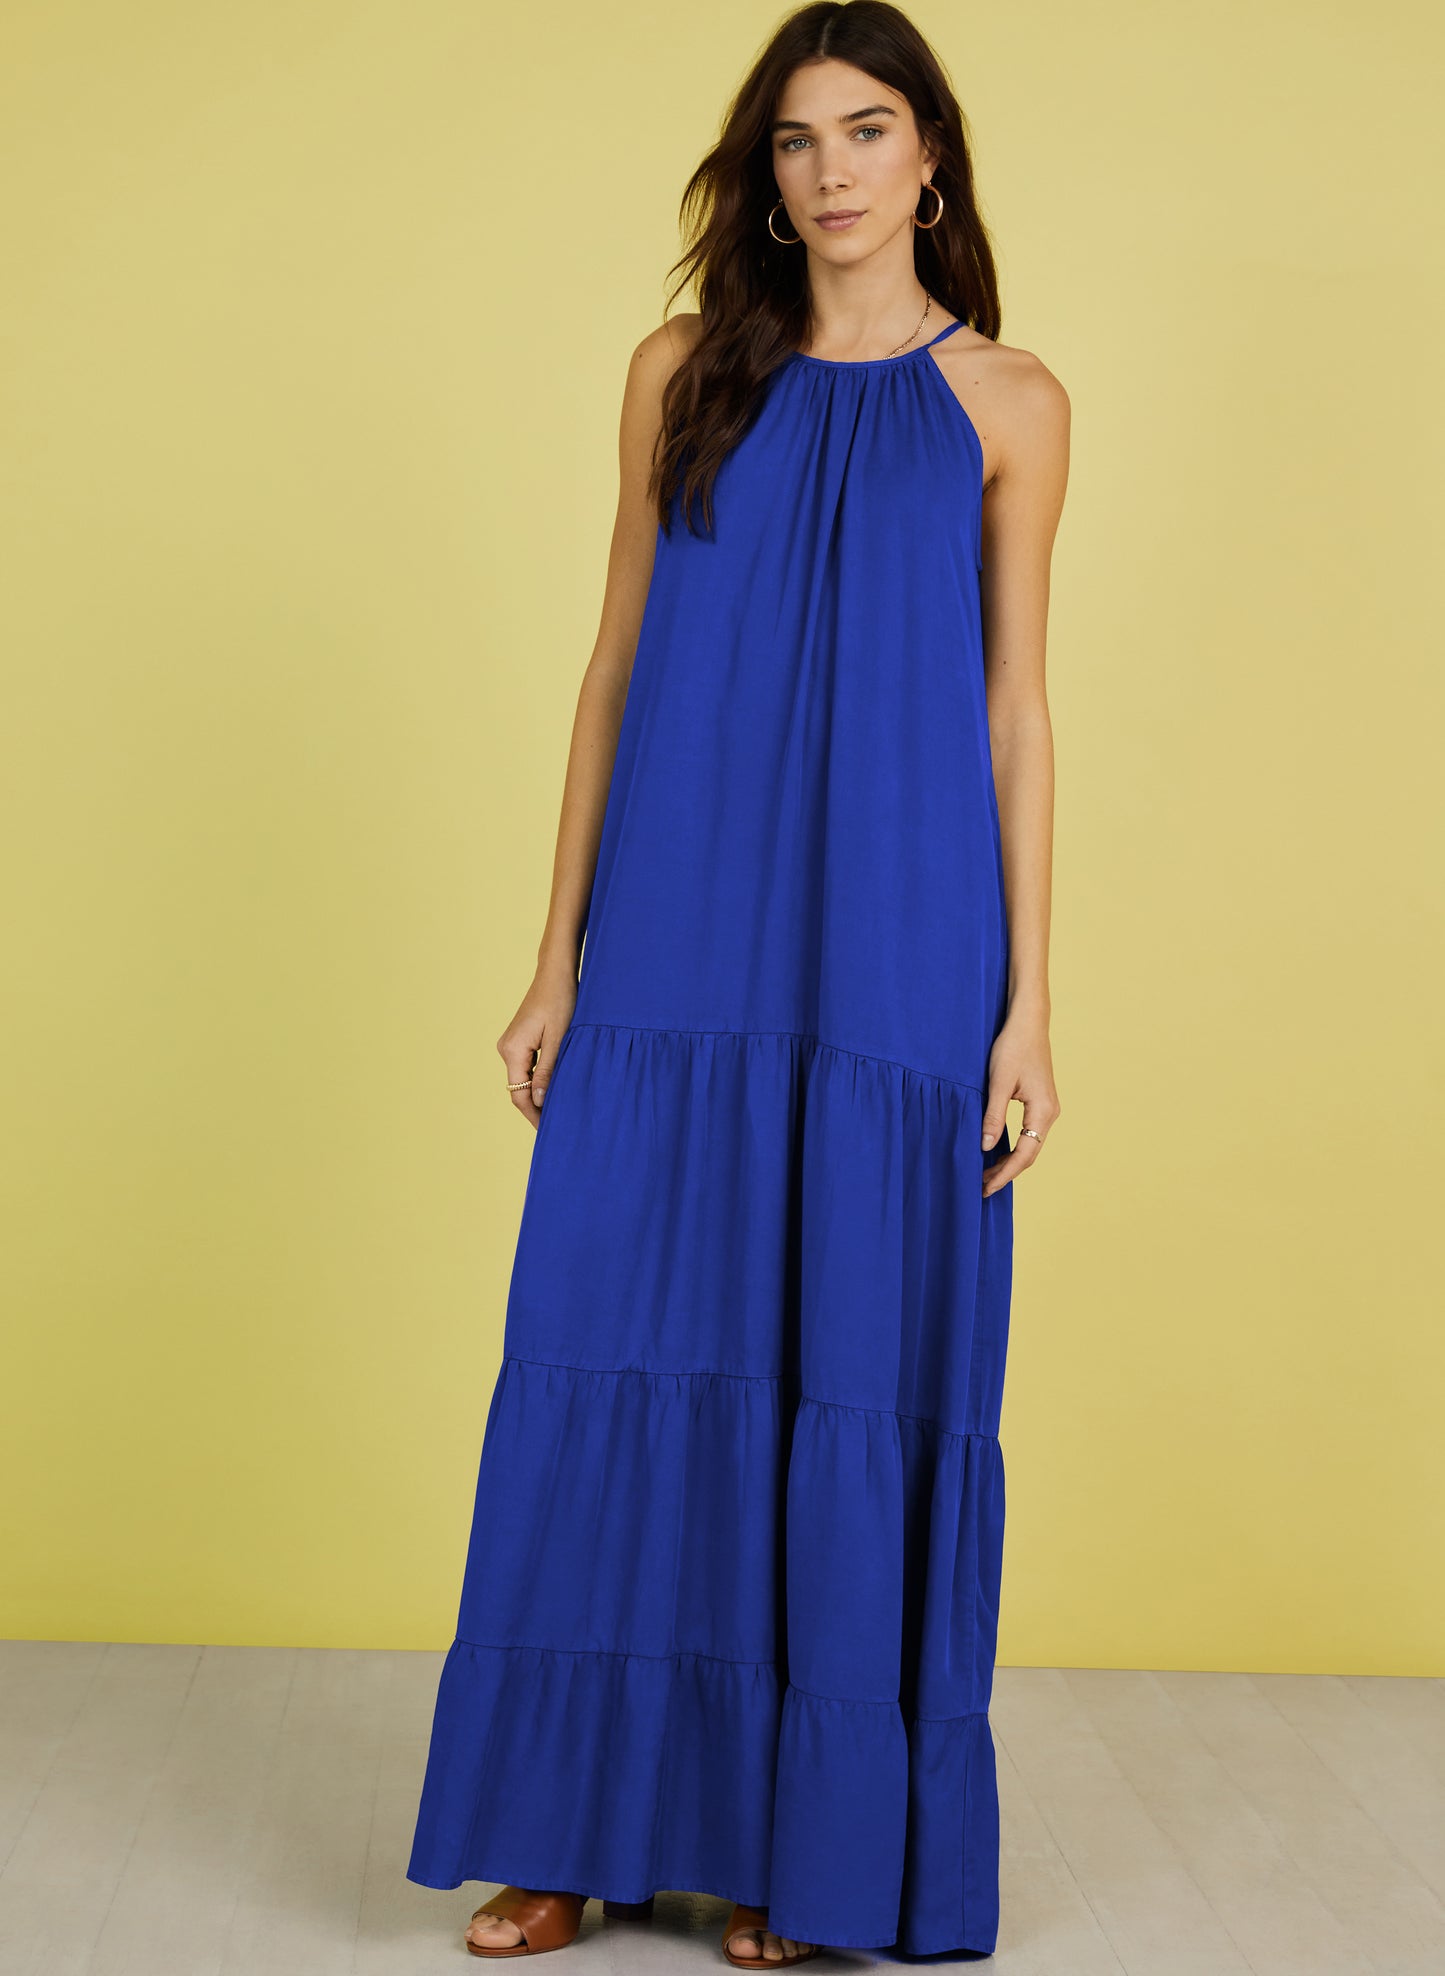 RENT - Everly Dress with TENCEL™